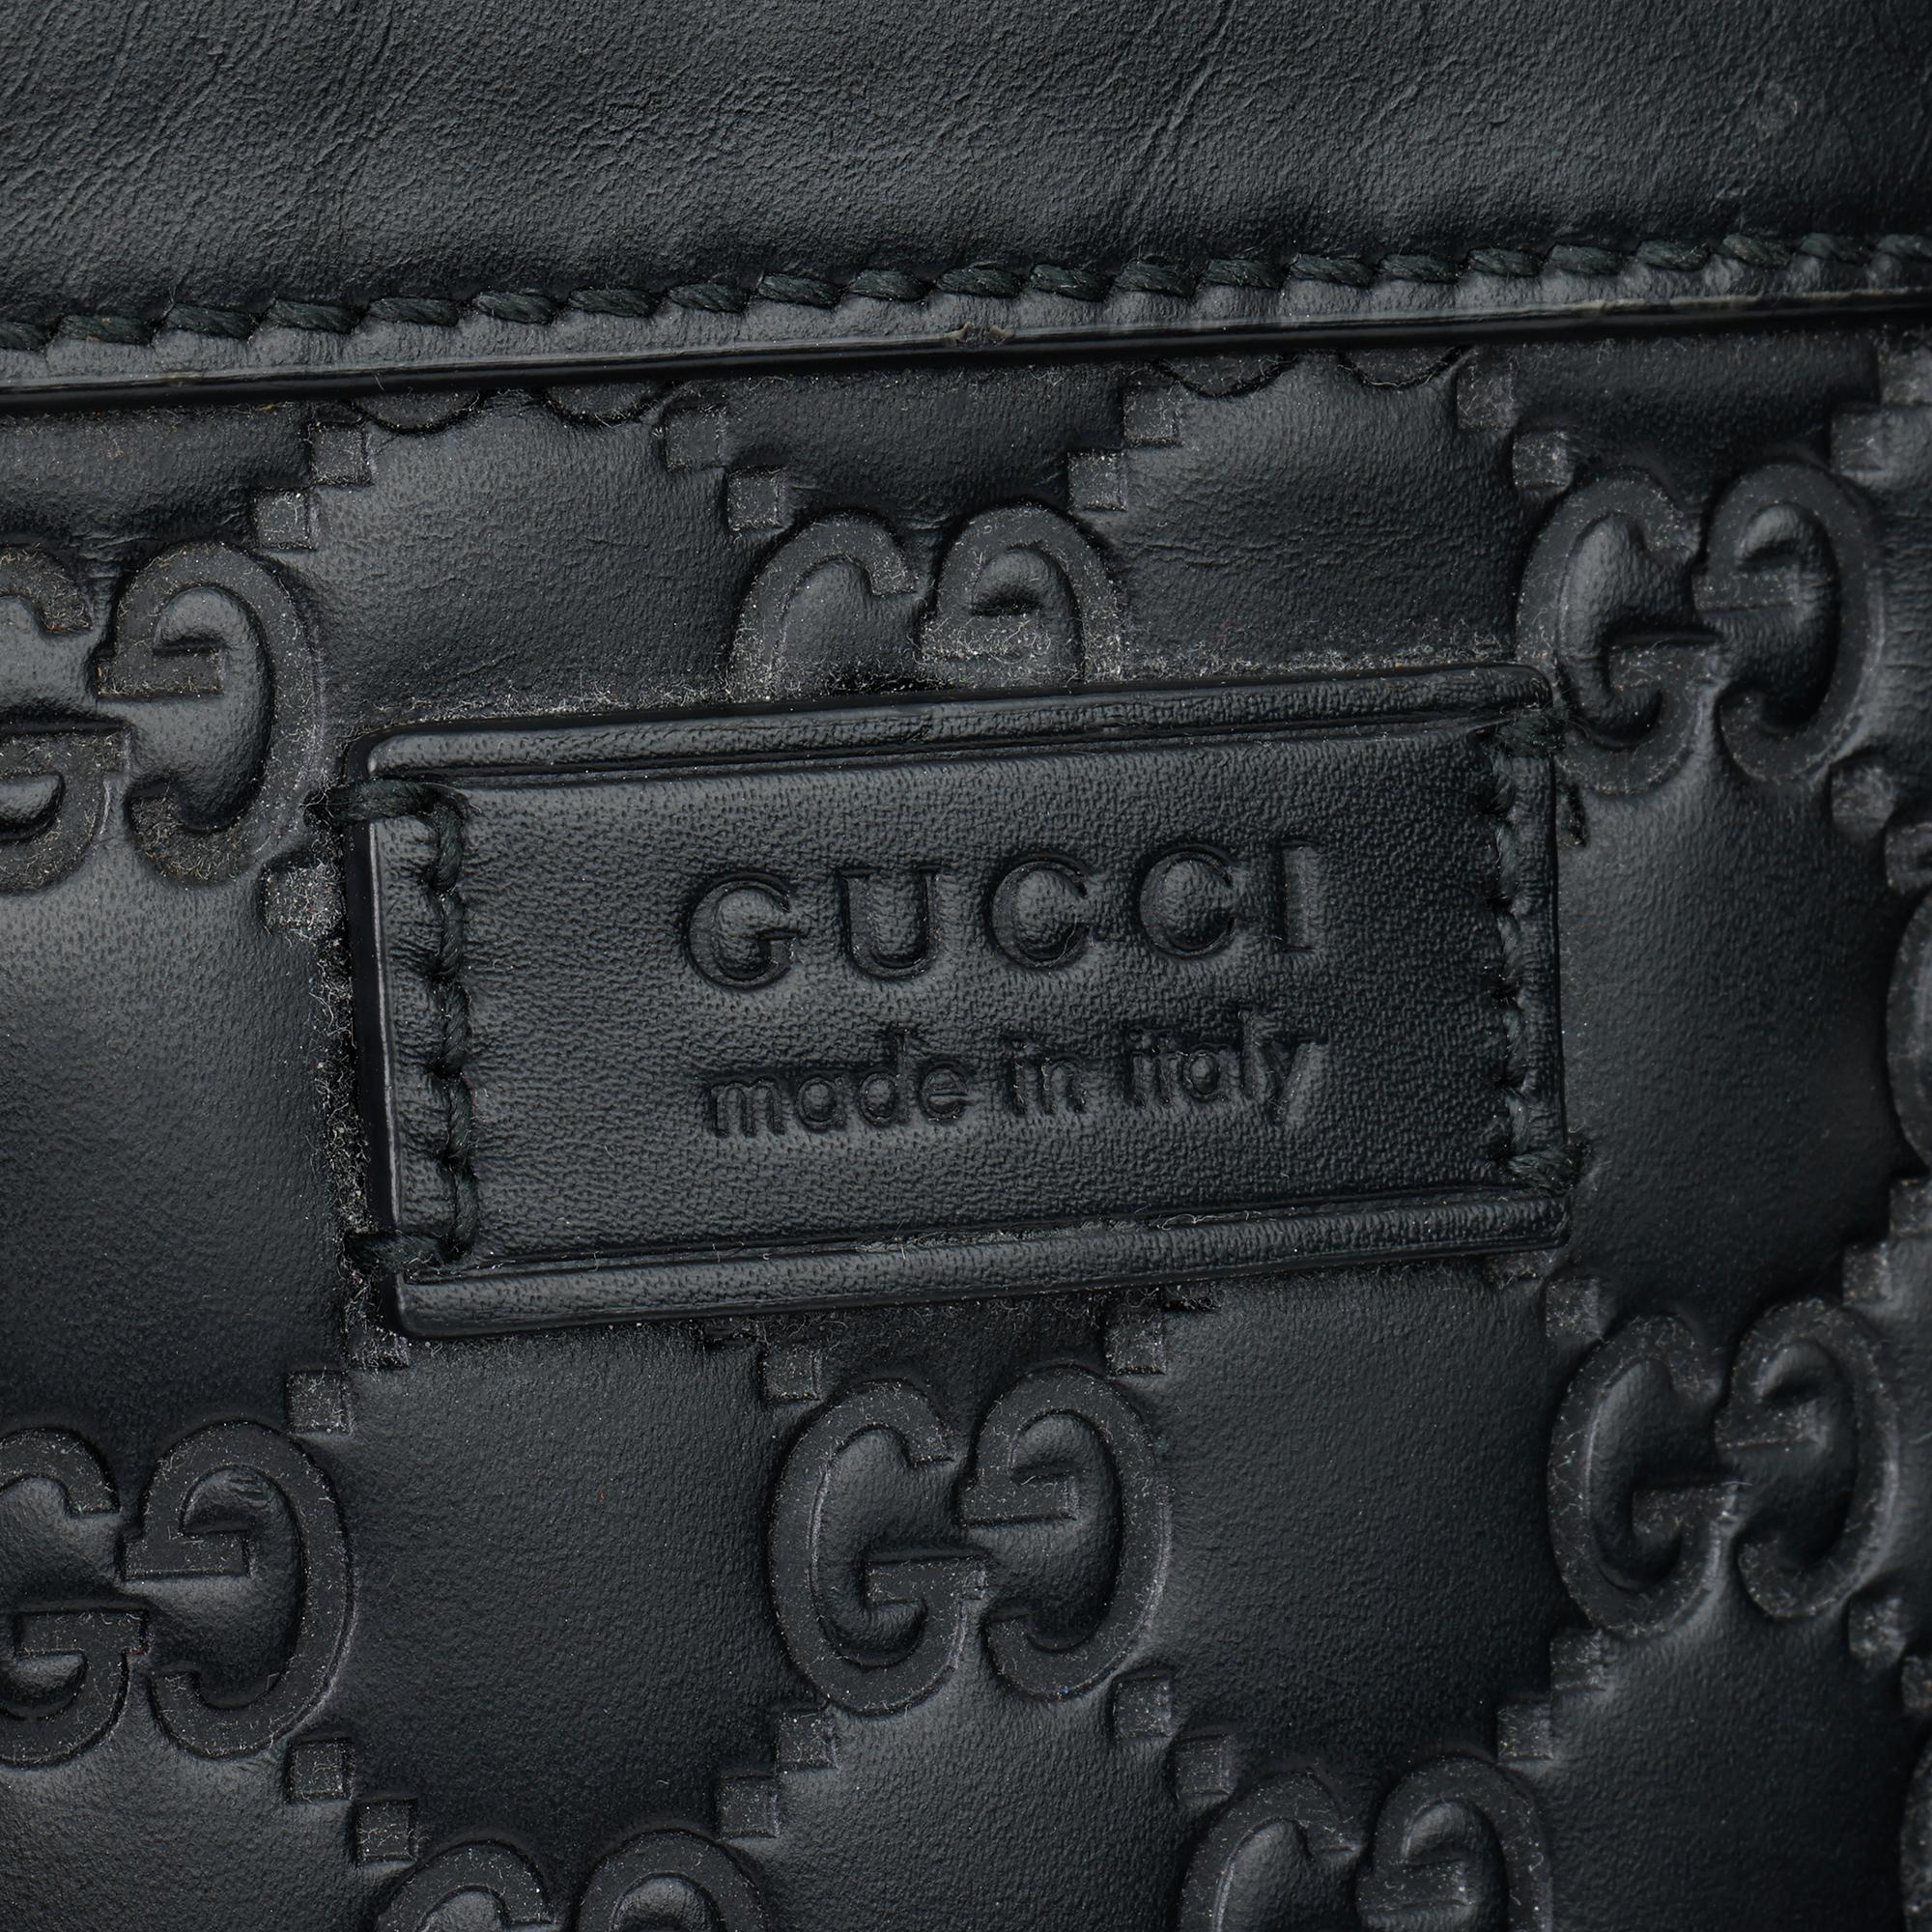 2010 Gucci Black GG Embossed Guccissima Calfskin Leather Briefcase 1